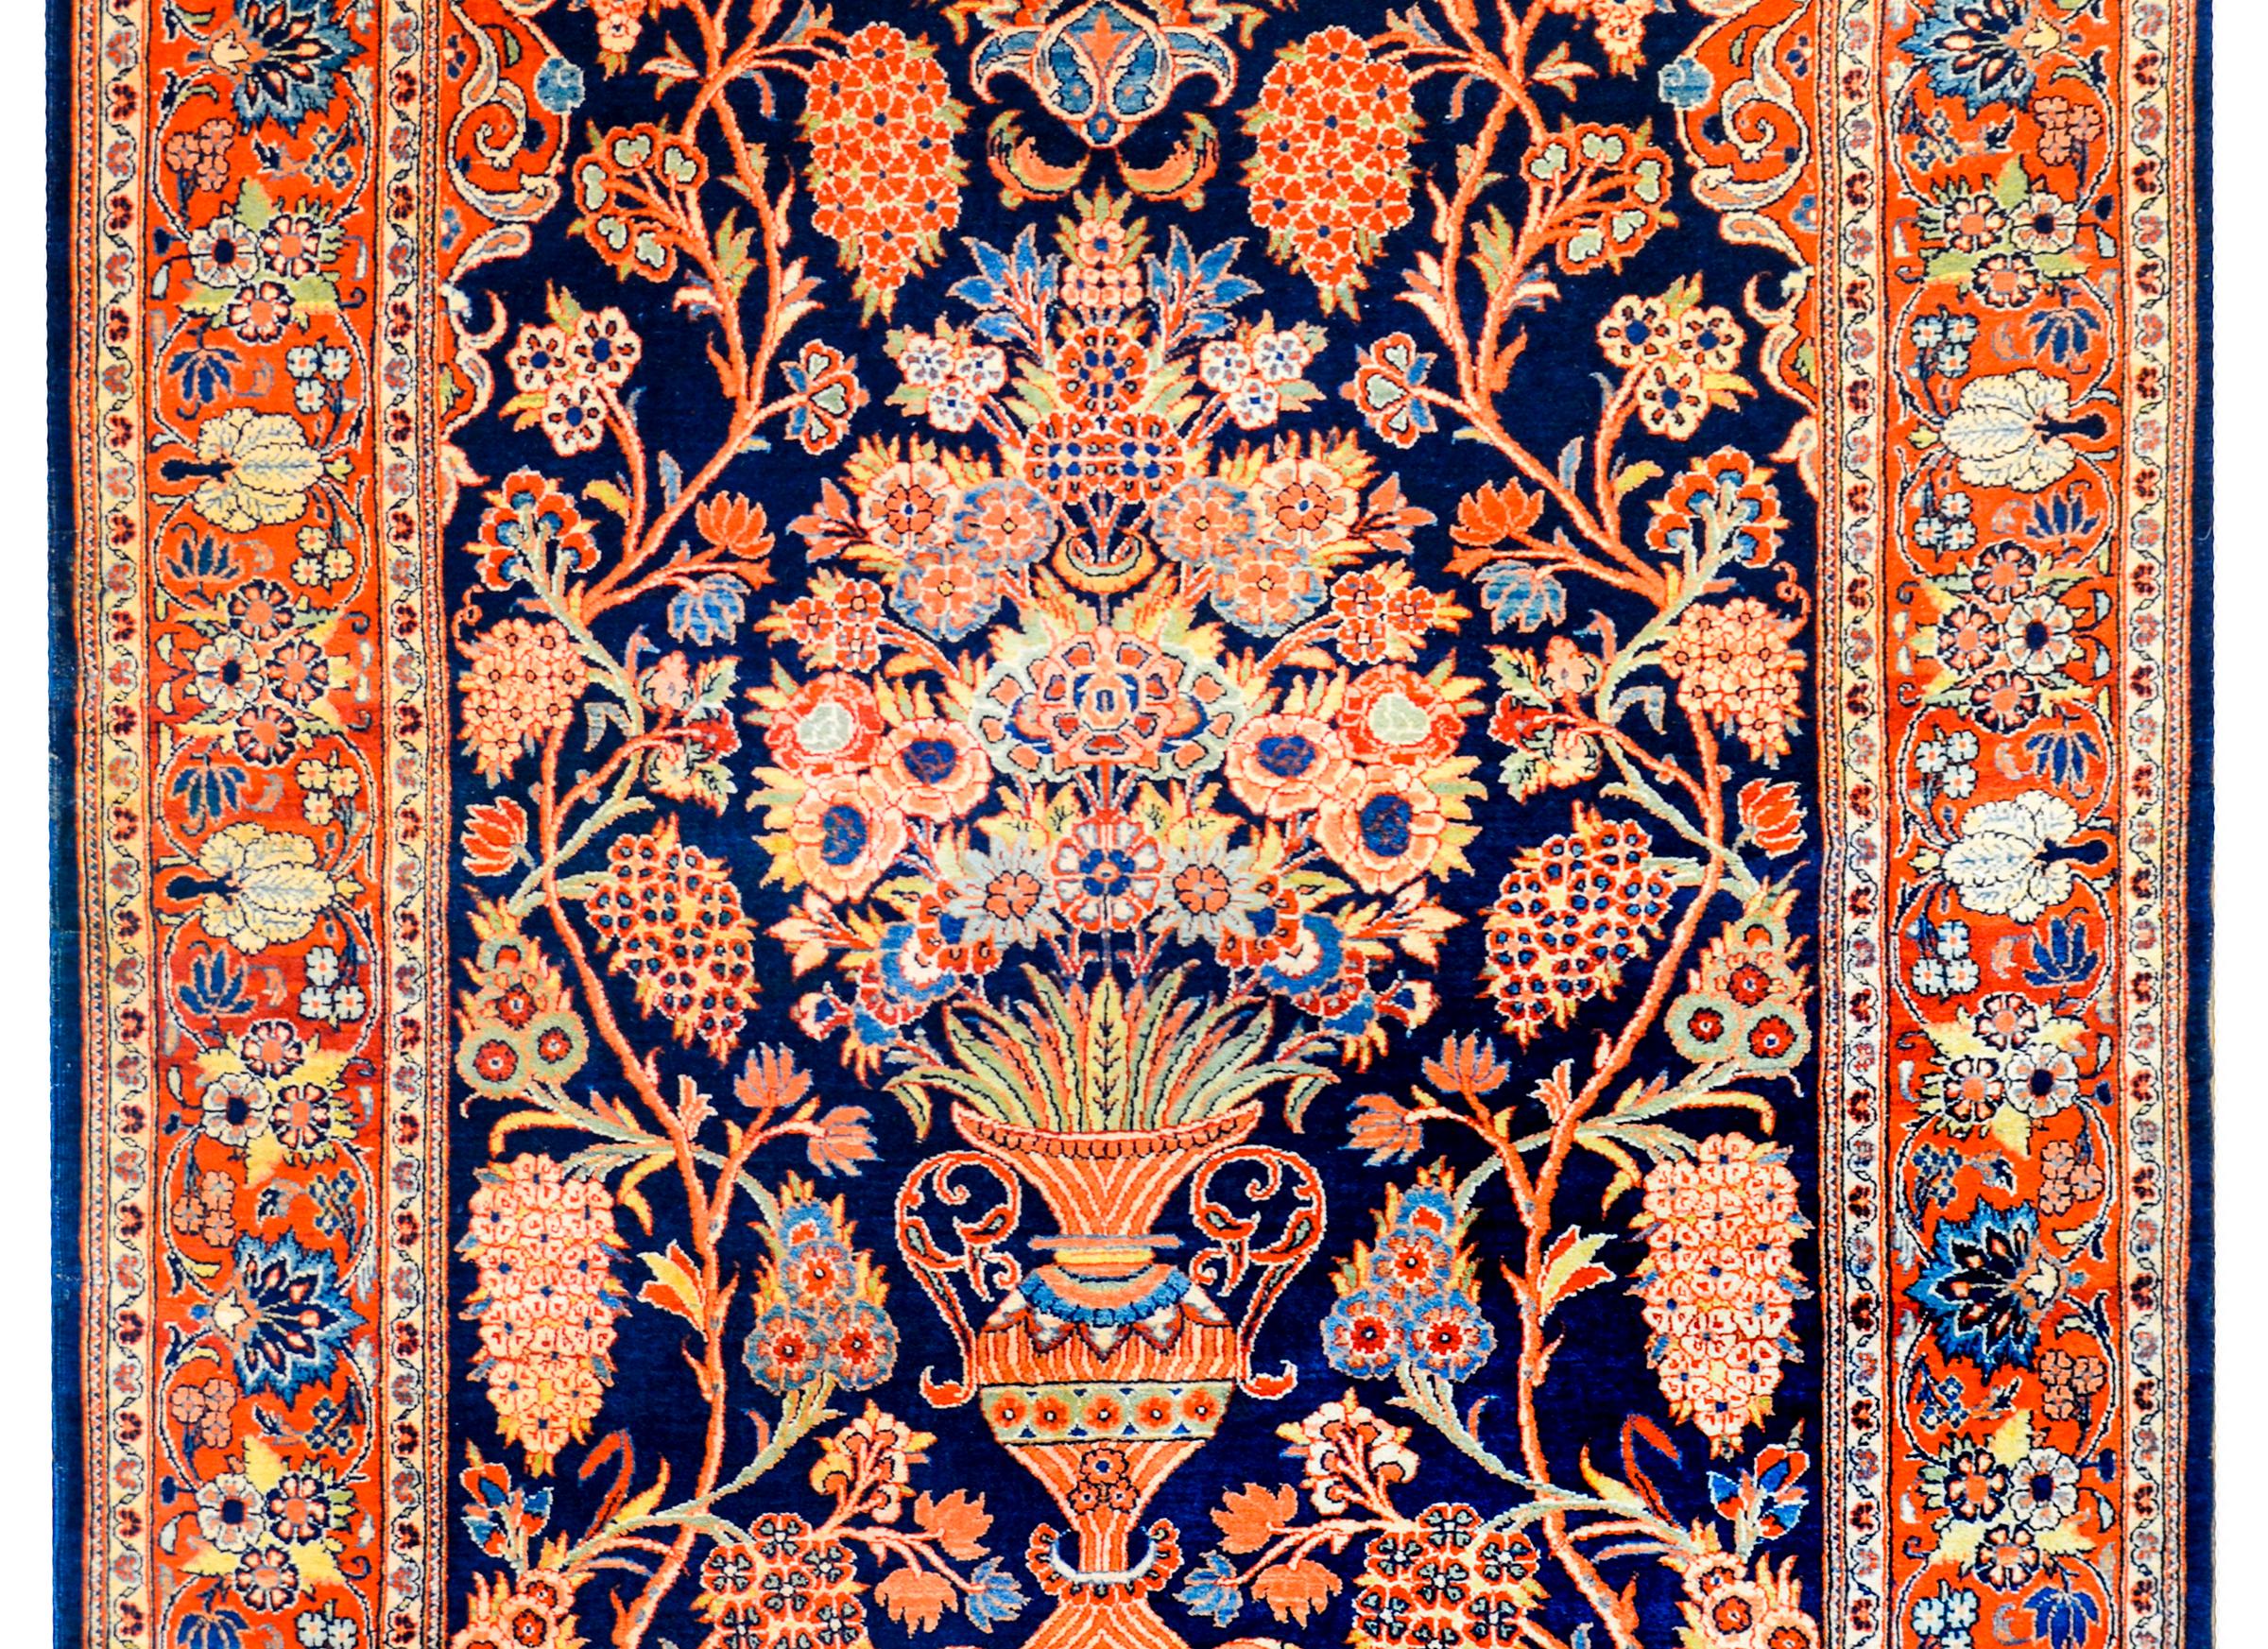 A gorgeous early 20th century Persian Kashan prayer rug with a wonderful central vase potted with a larger-than-life tree-of-life pattern woven in multicolored vegetable dyed wool on a deep indigo background. The border is wide, with a complimentary